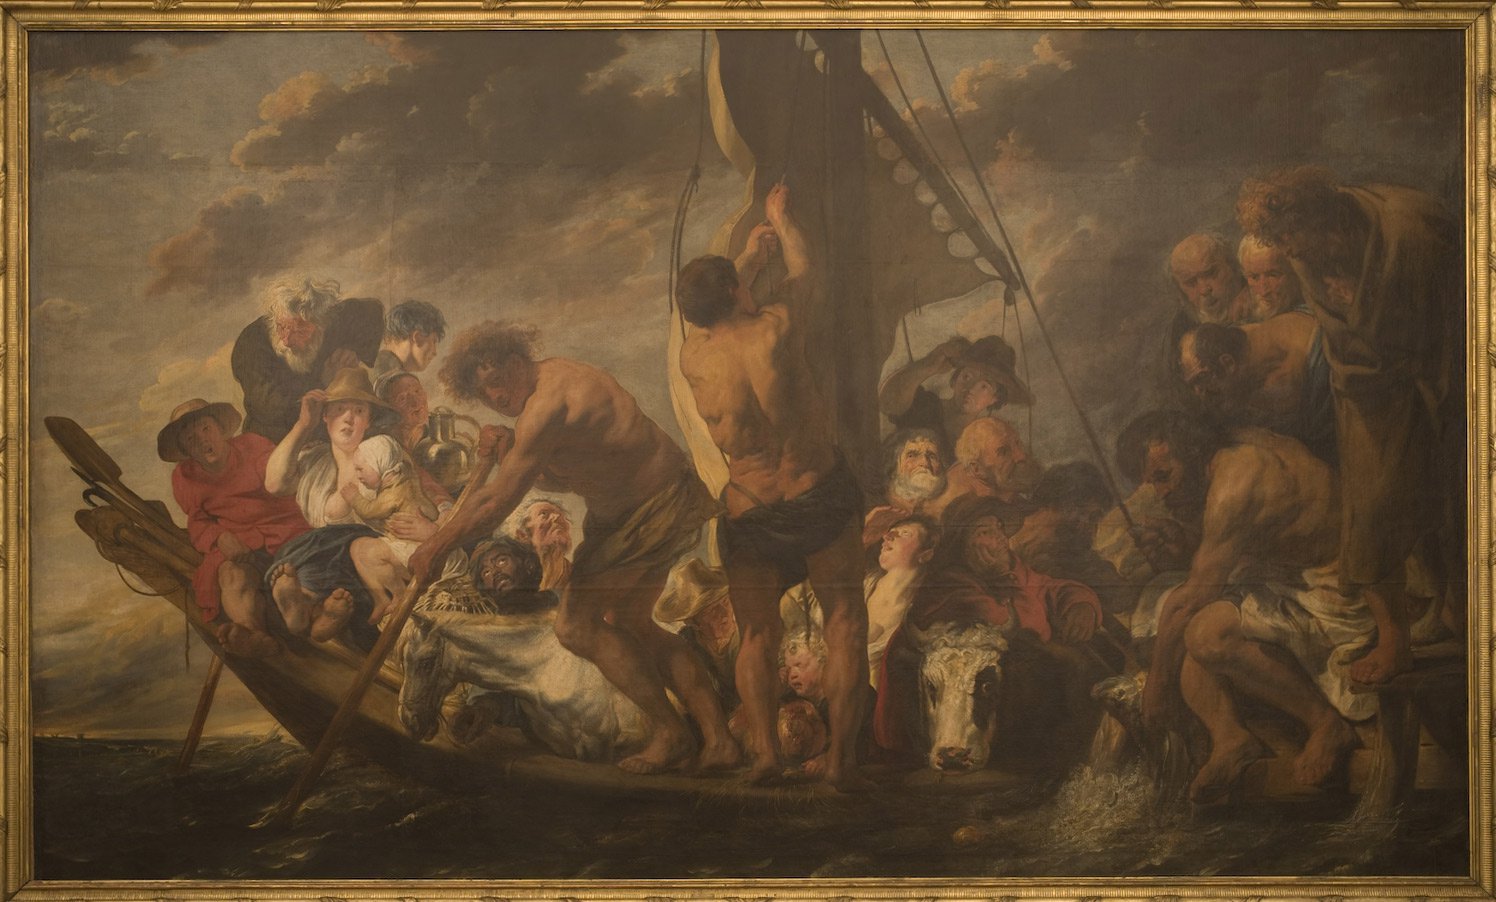 Jacob Jordaens (1593–1678), “The Tribute Money. Peter Finding the Silver Coin in the Mouth of the Fish”, also called “The Ferry Boat to Antwerp” (Oil on canvas, 279.5 by 467 cm. With a stereomicroscope combined with a floor stand the paint surface has been investigated and analyzed. © Statens Museum for Kunst, Copenhagen